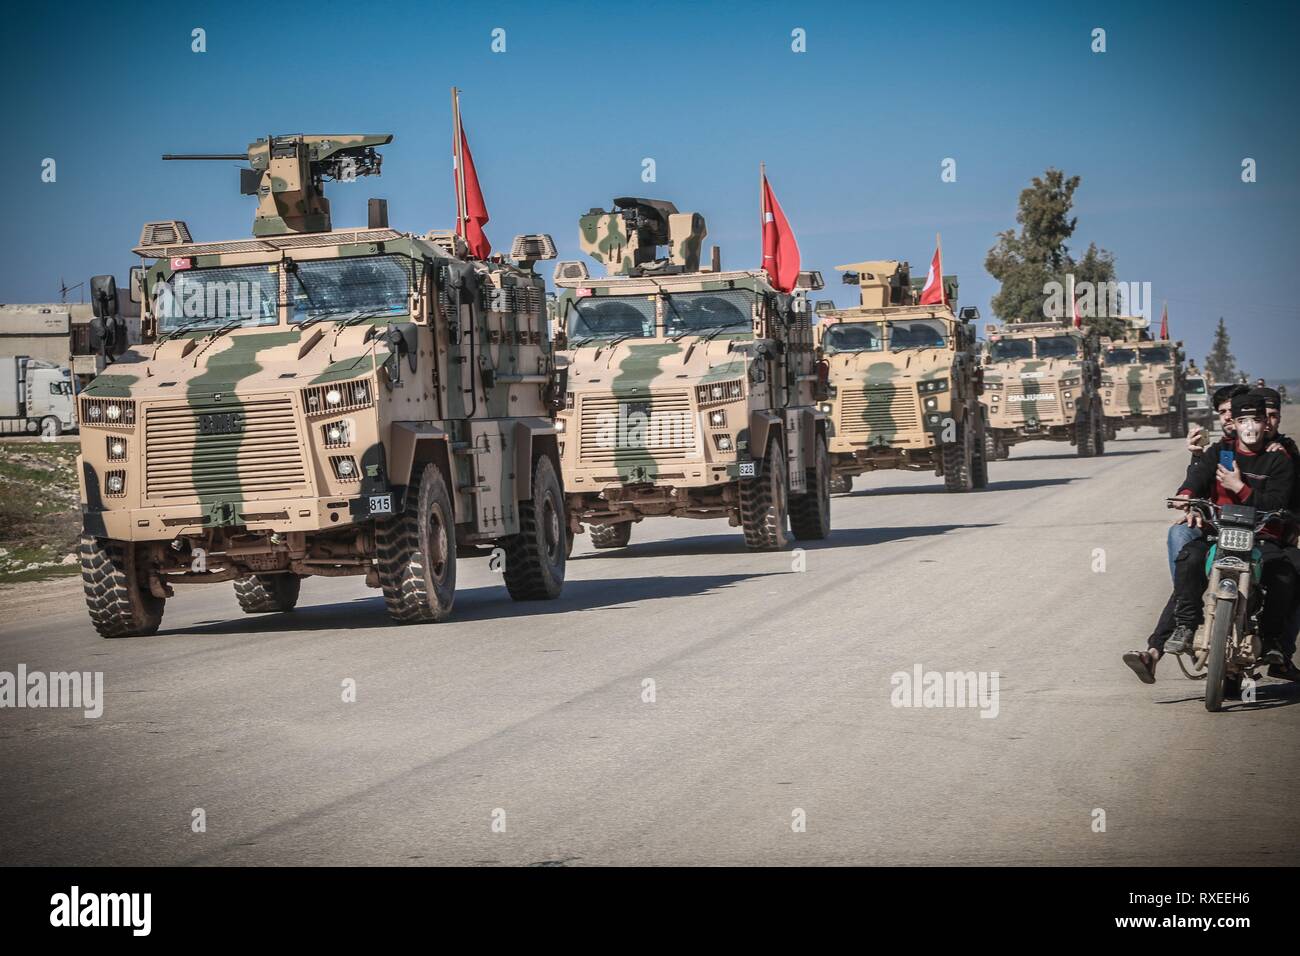 Fleet of armored vehicles seen during the patrol. The Turkish army begins its first patrol around the Syrian border in the demilitarized zone between the control points with a number of armored vehicles. Stock Photo